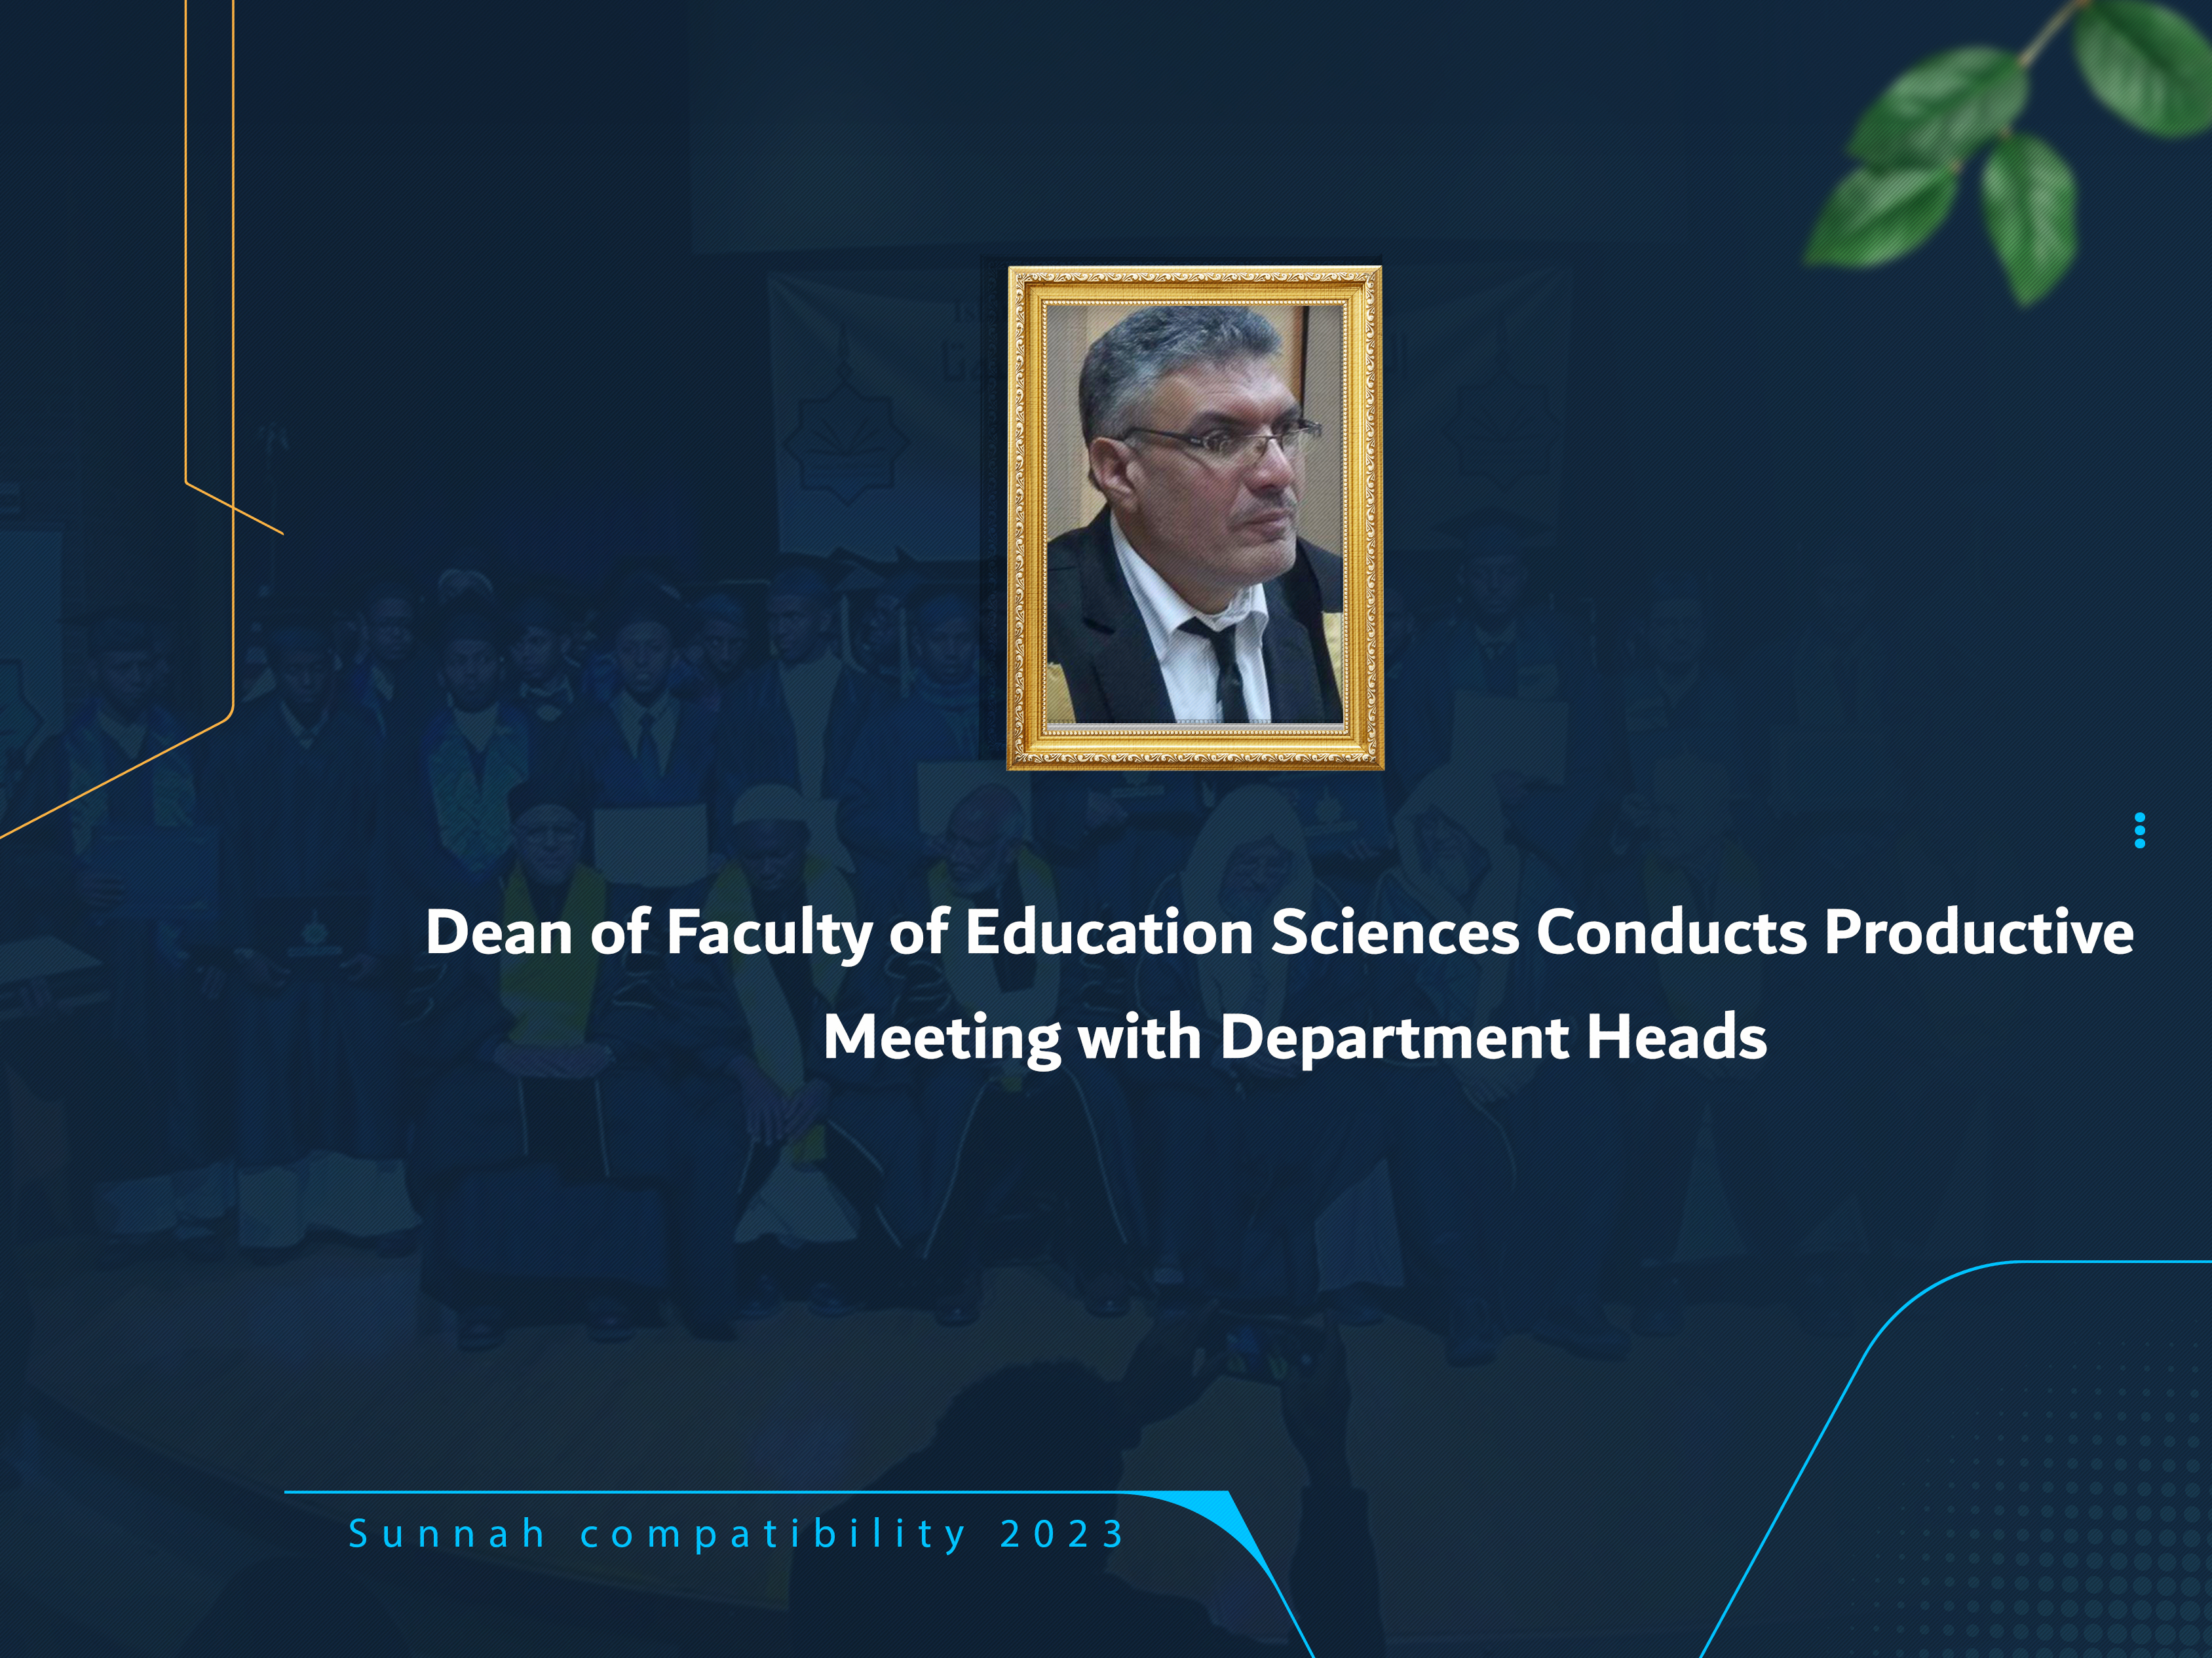 Dean of Faculty of Education Sciences Conducts Productive Meeting with Department Heads